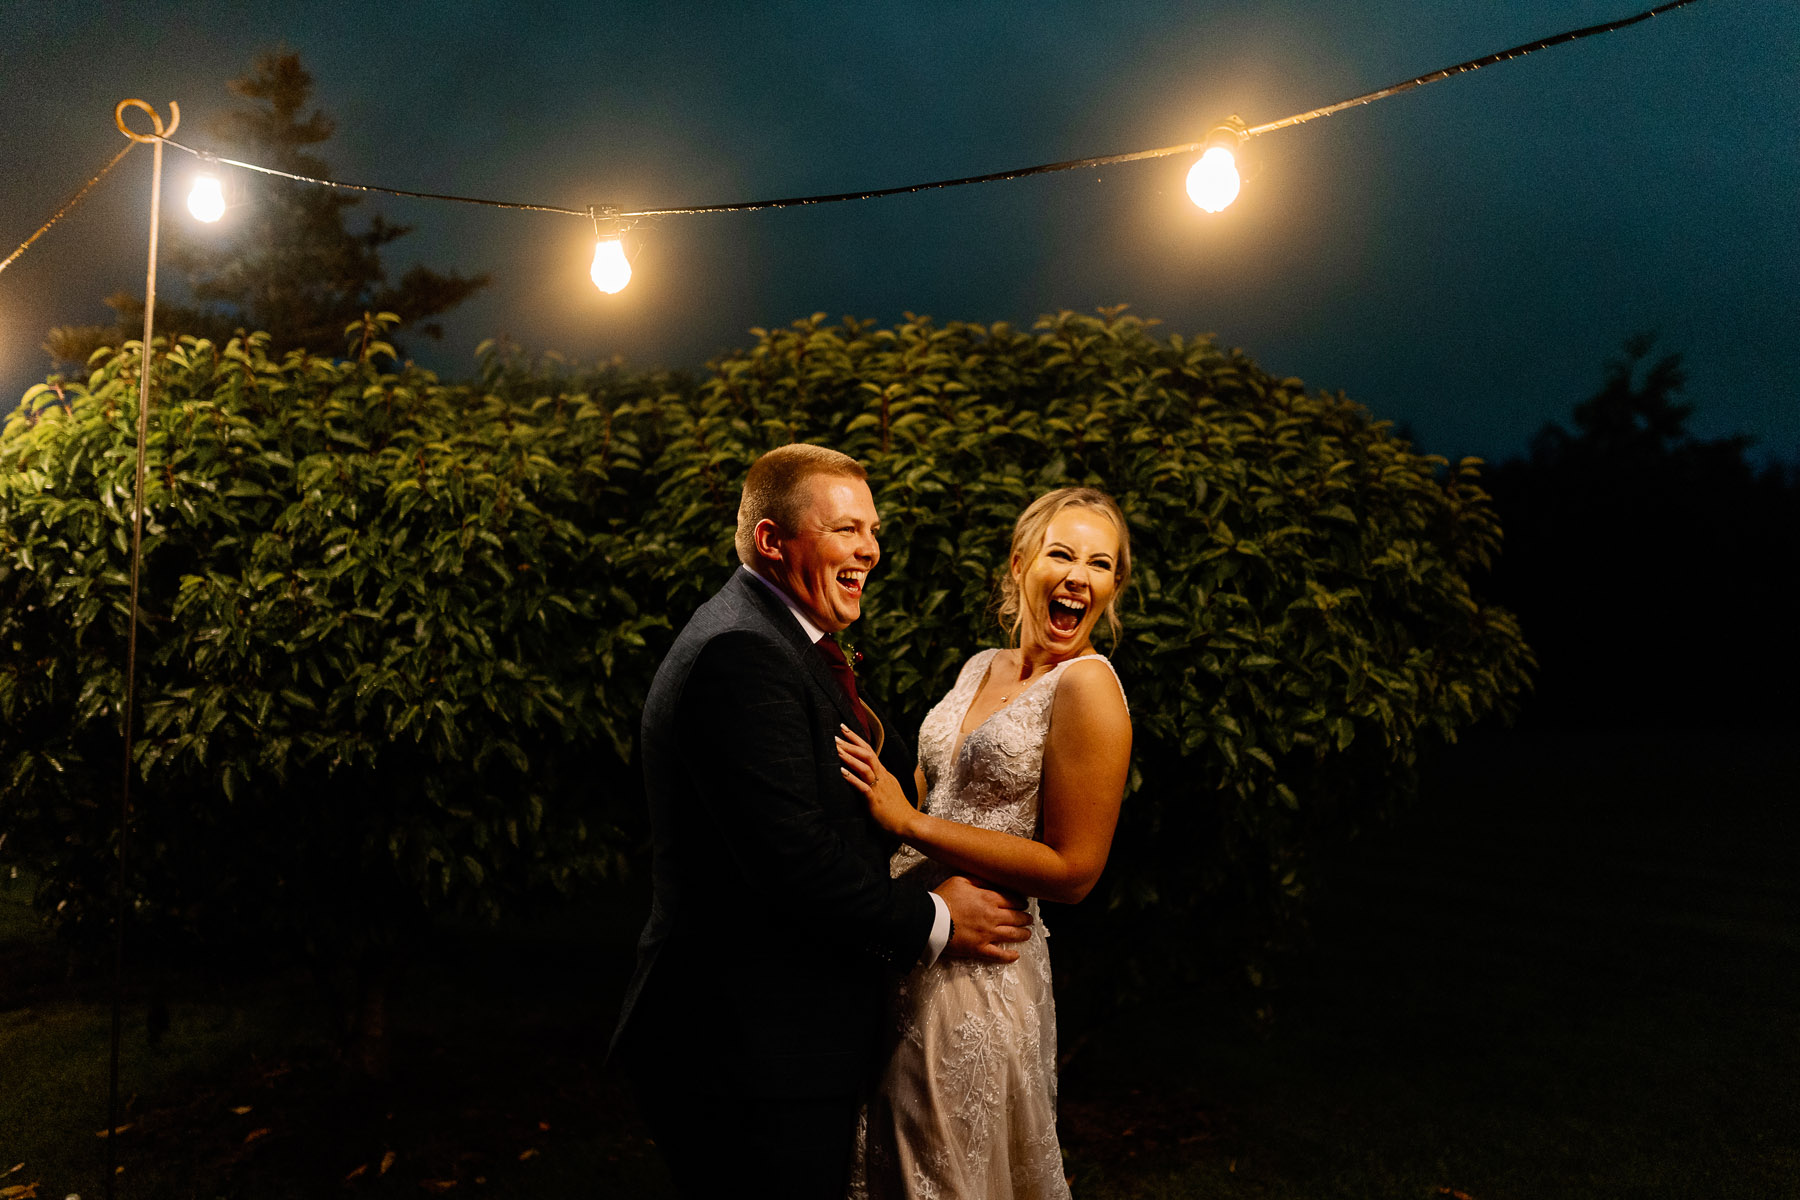 Bride and Groom at The Out Barn Wedding Venue in Clitheroe